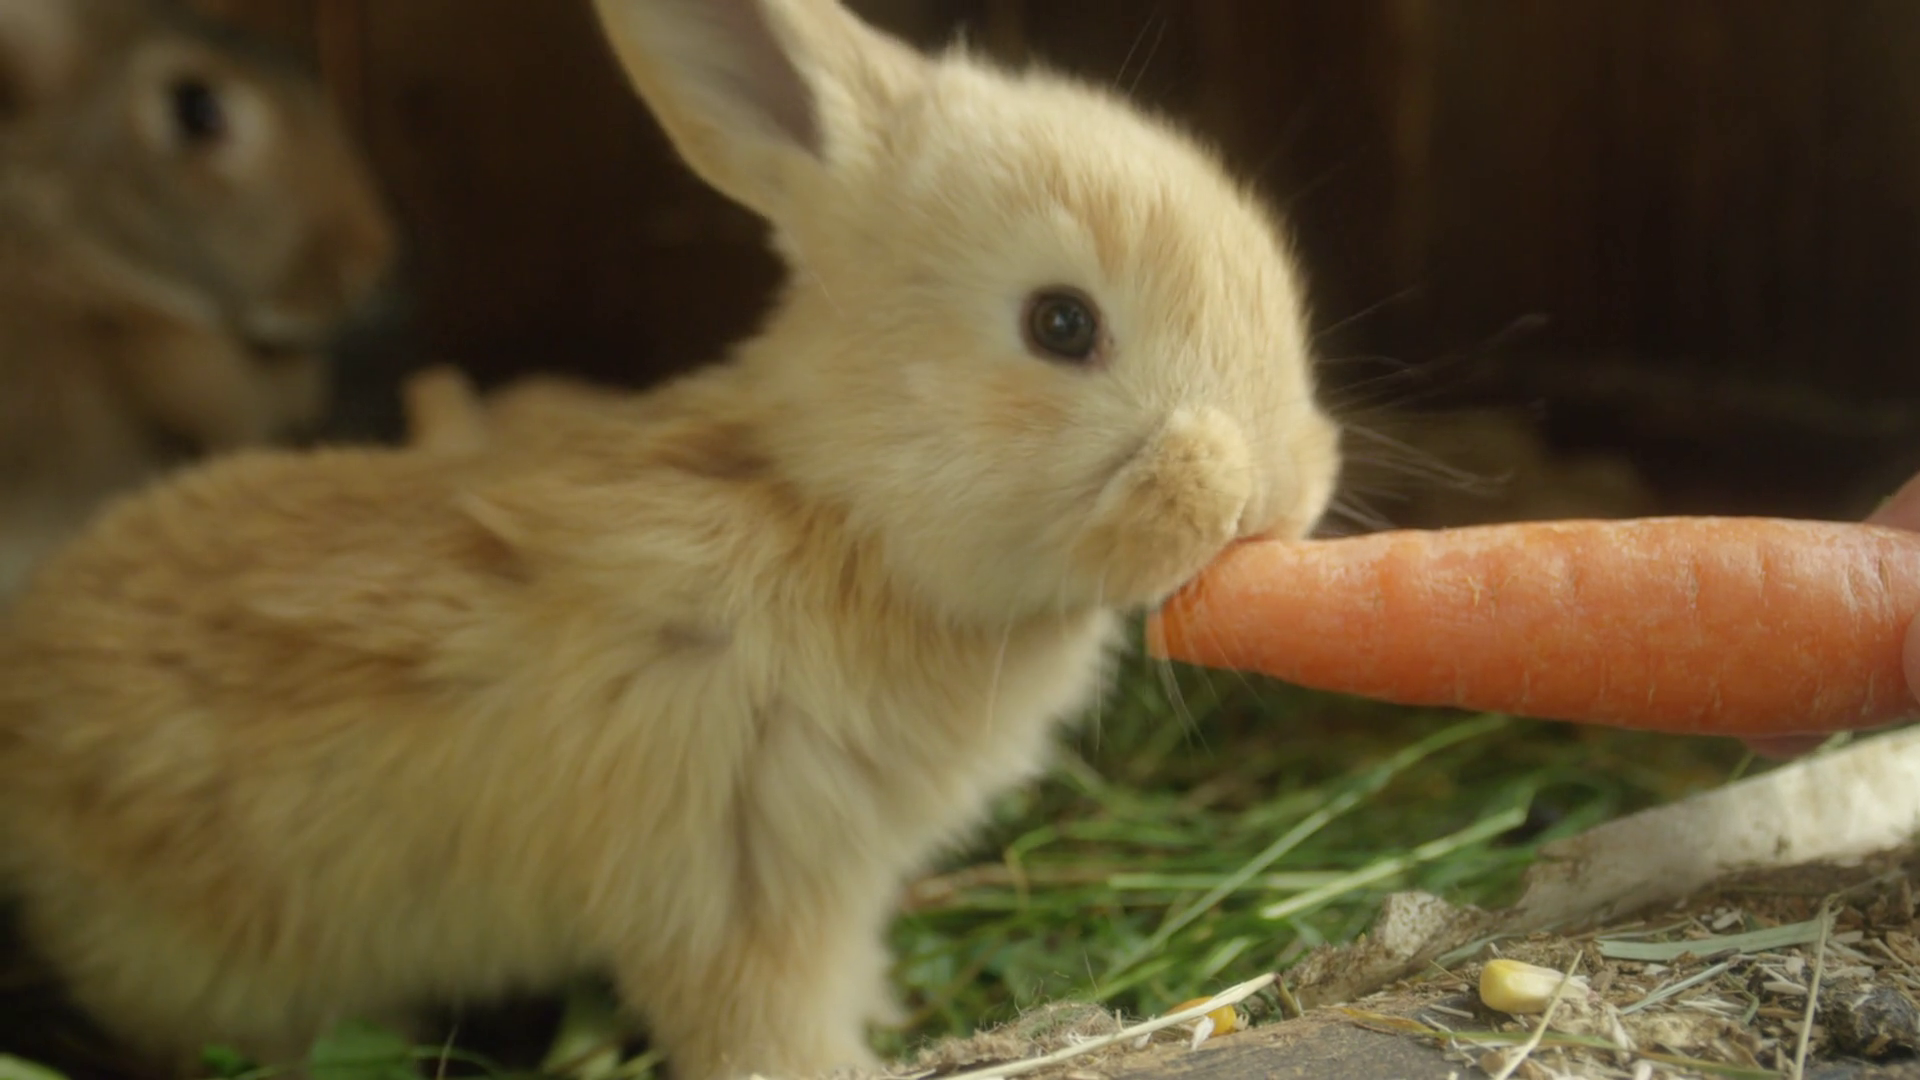 CLOSE UP: Beautiful fluffy light brown baby bunny eating big fresh ...